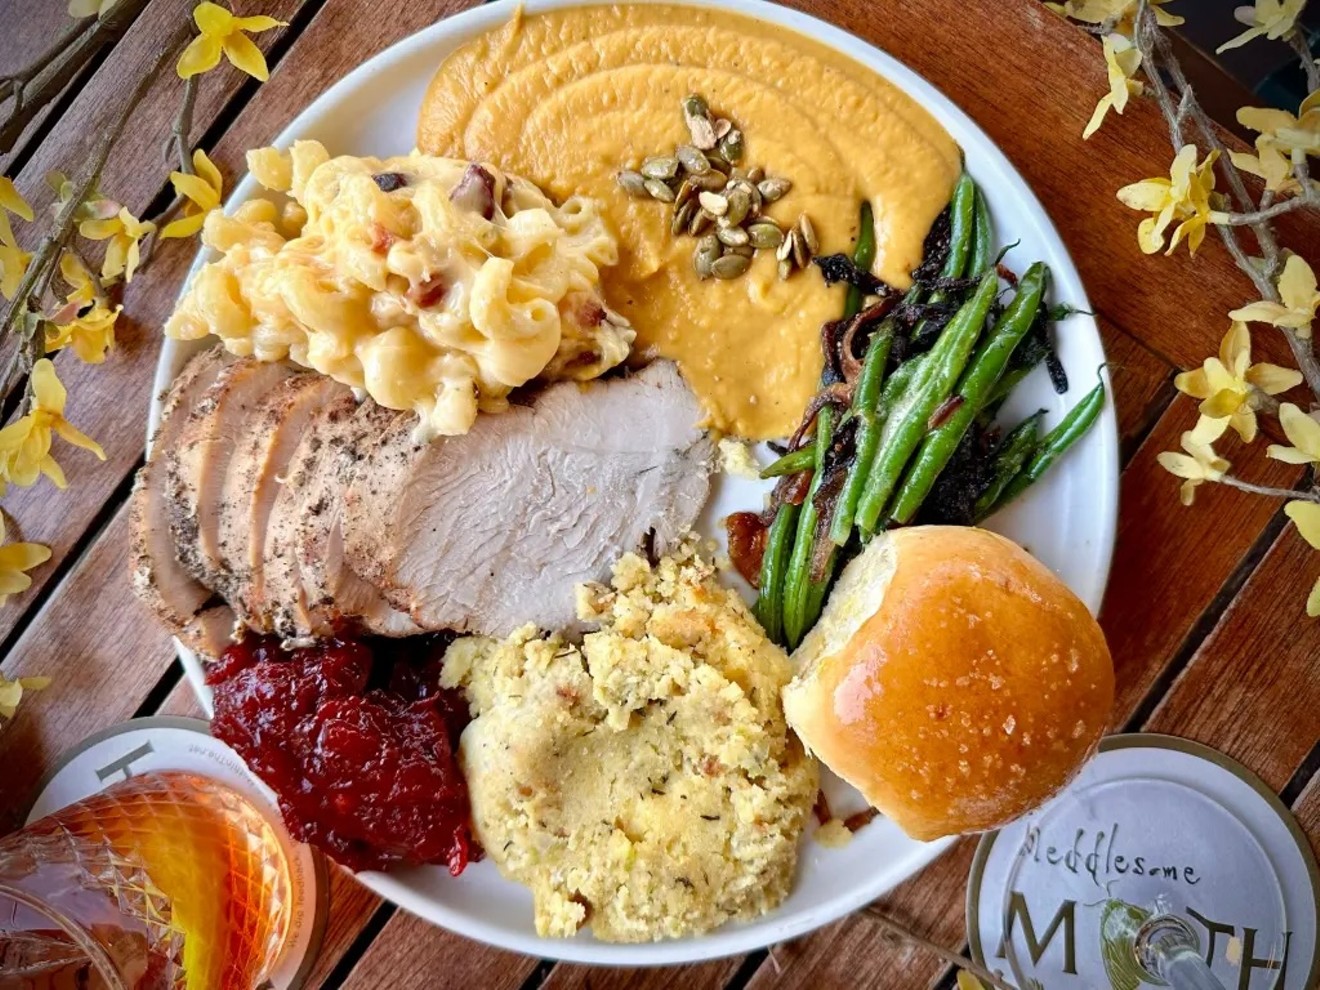 Meddlesome Moth will have a full turkey dinner for just $32 per person.